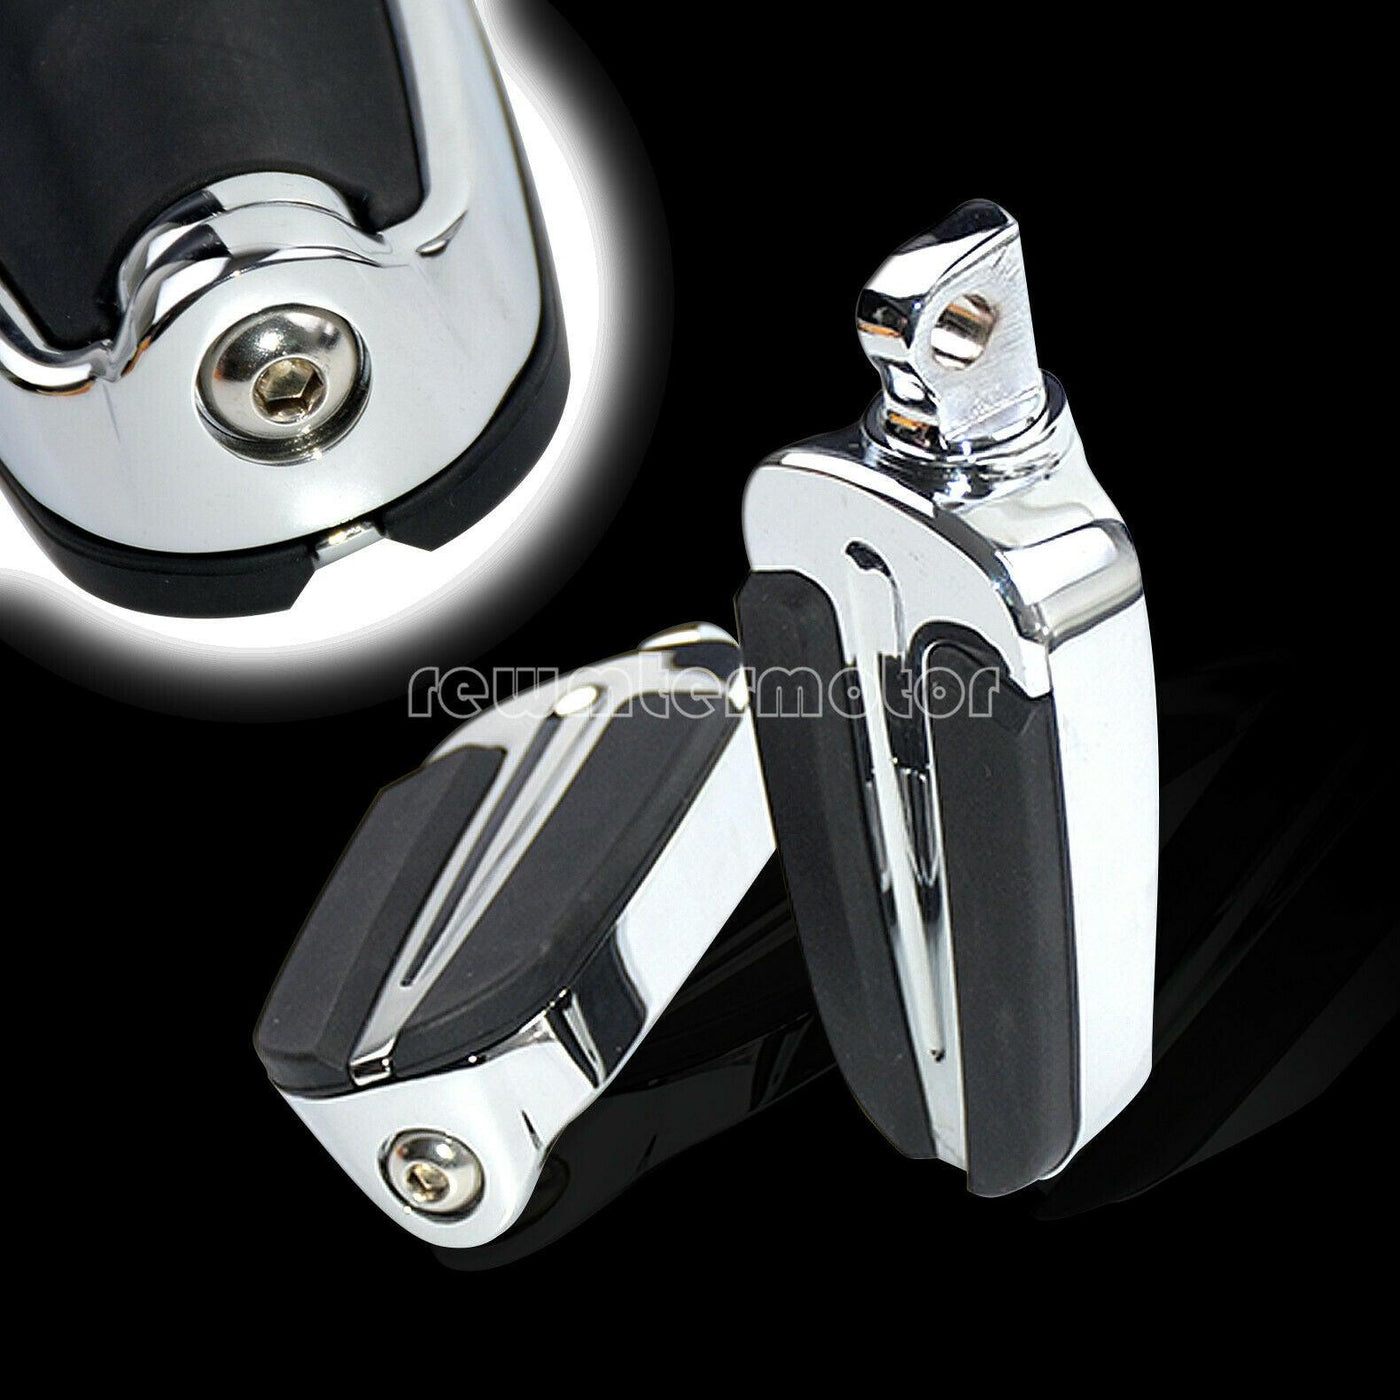 2X Motorcycle Chrome Footpegs Male Mount Foot Pegs Fit For Harley Touring Dyna - Moto Life Products